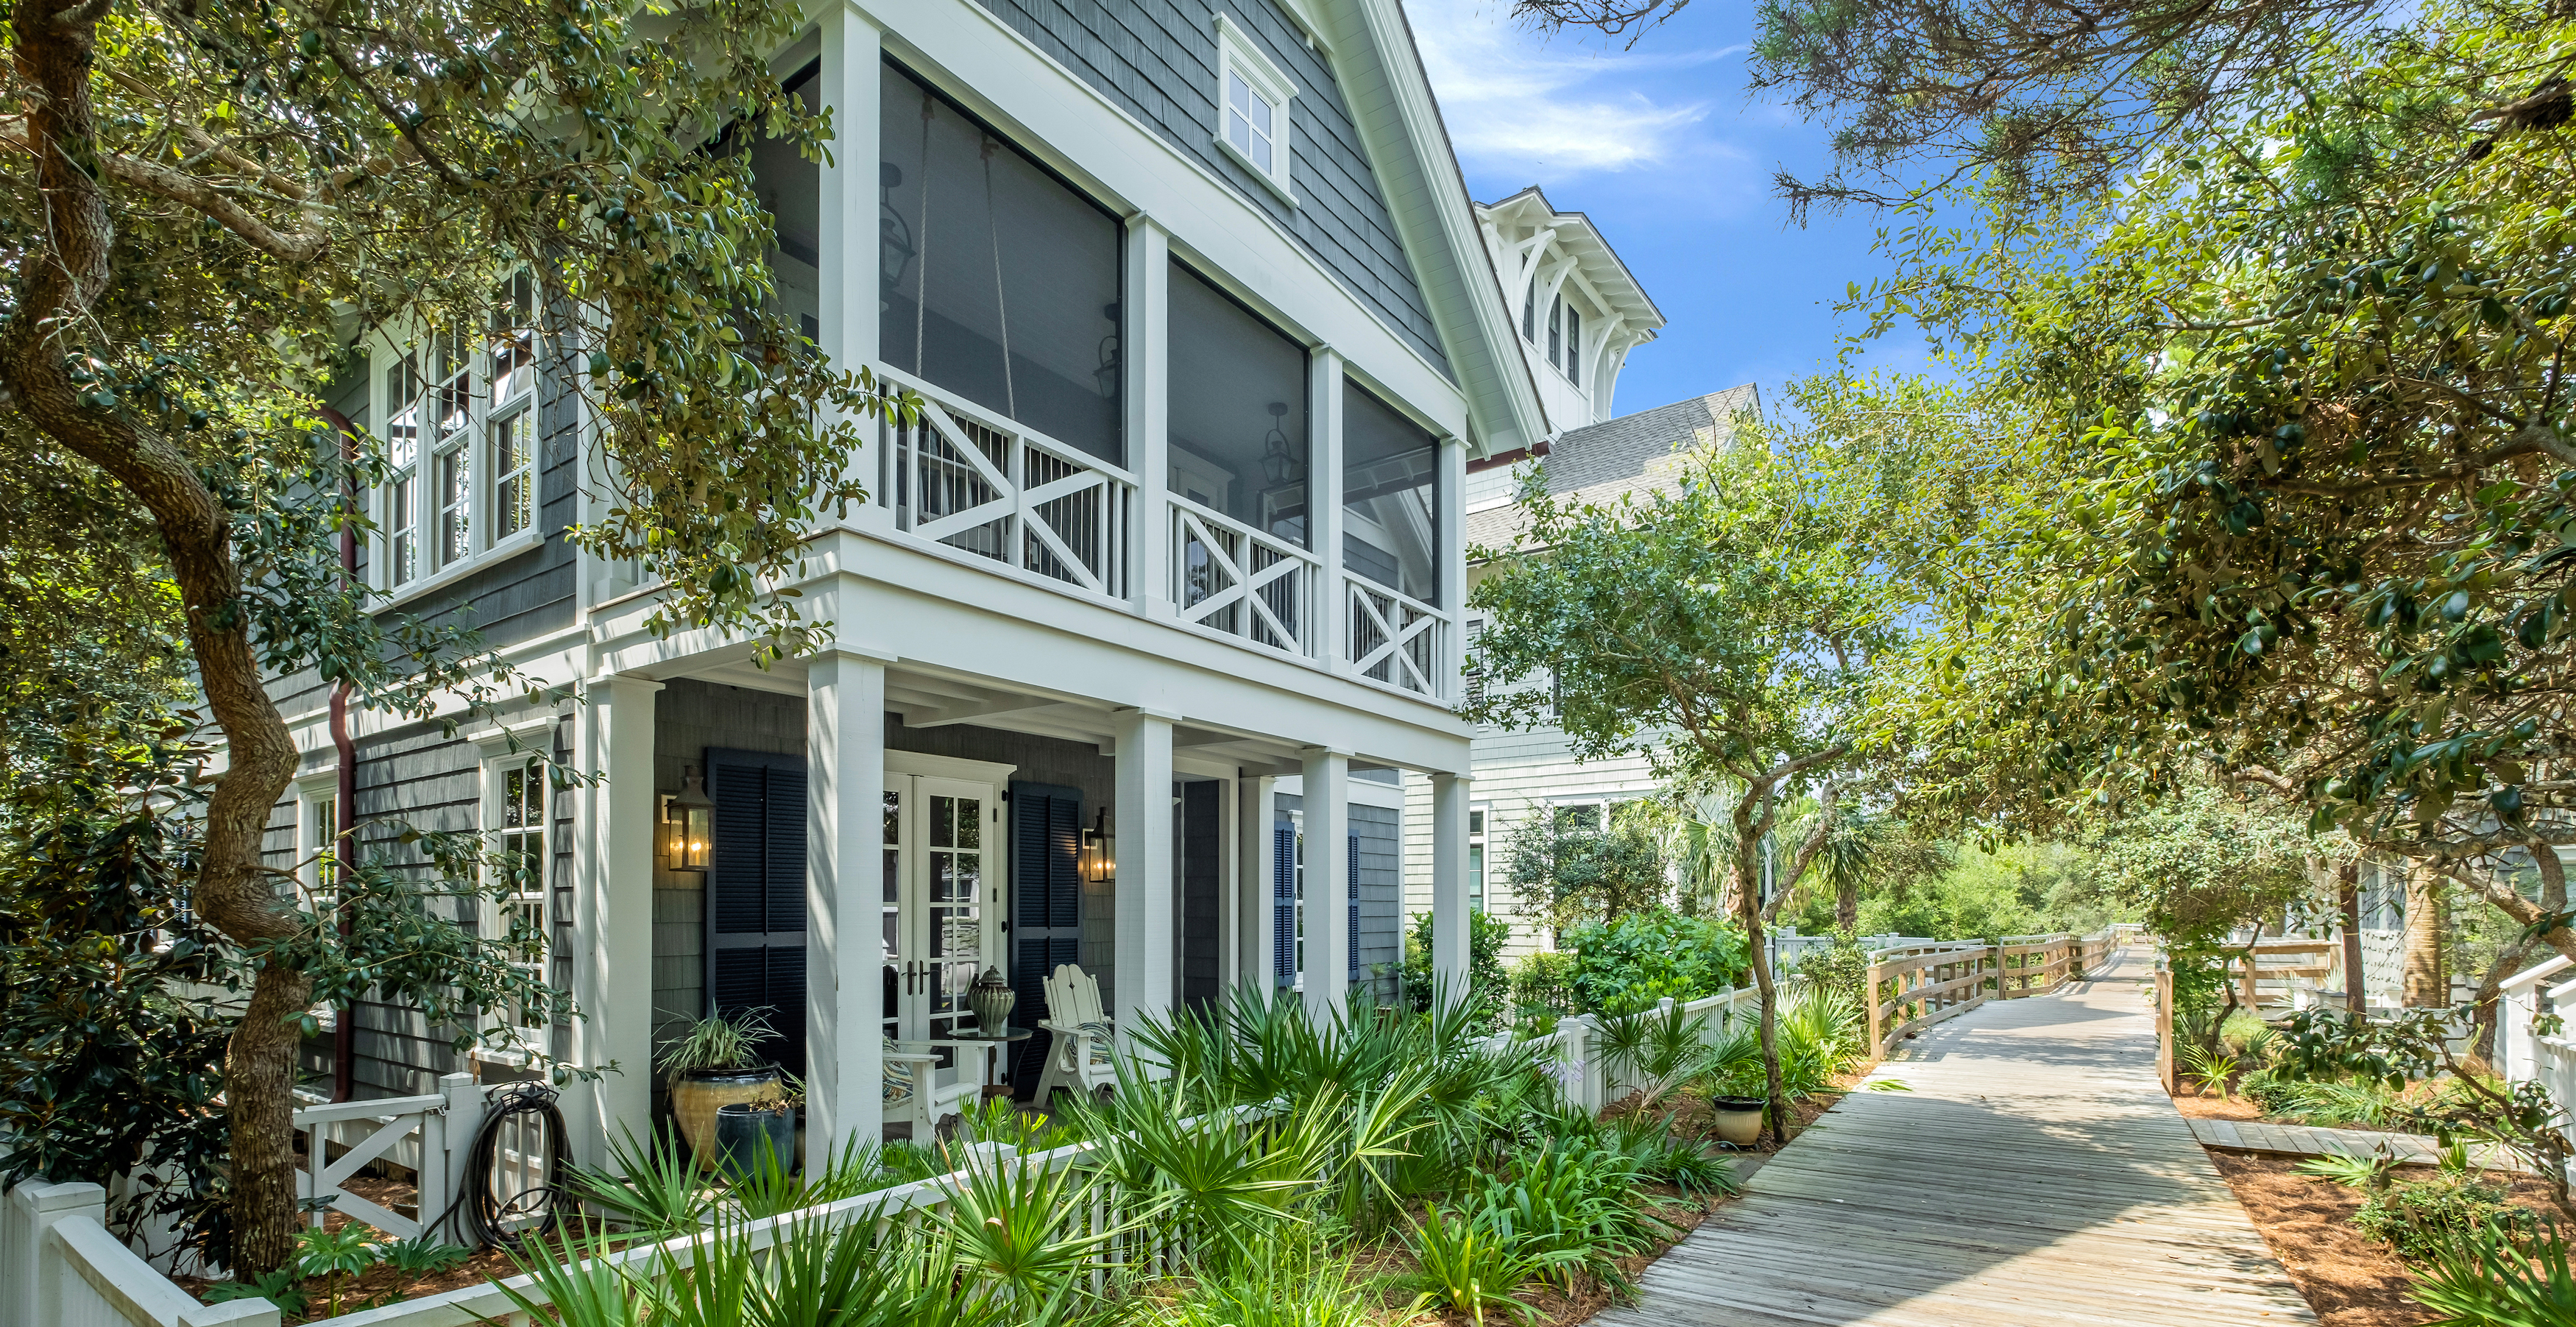 A 2 story Watersound beach cottage in front of a community walking path lined by palmettos